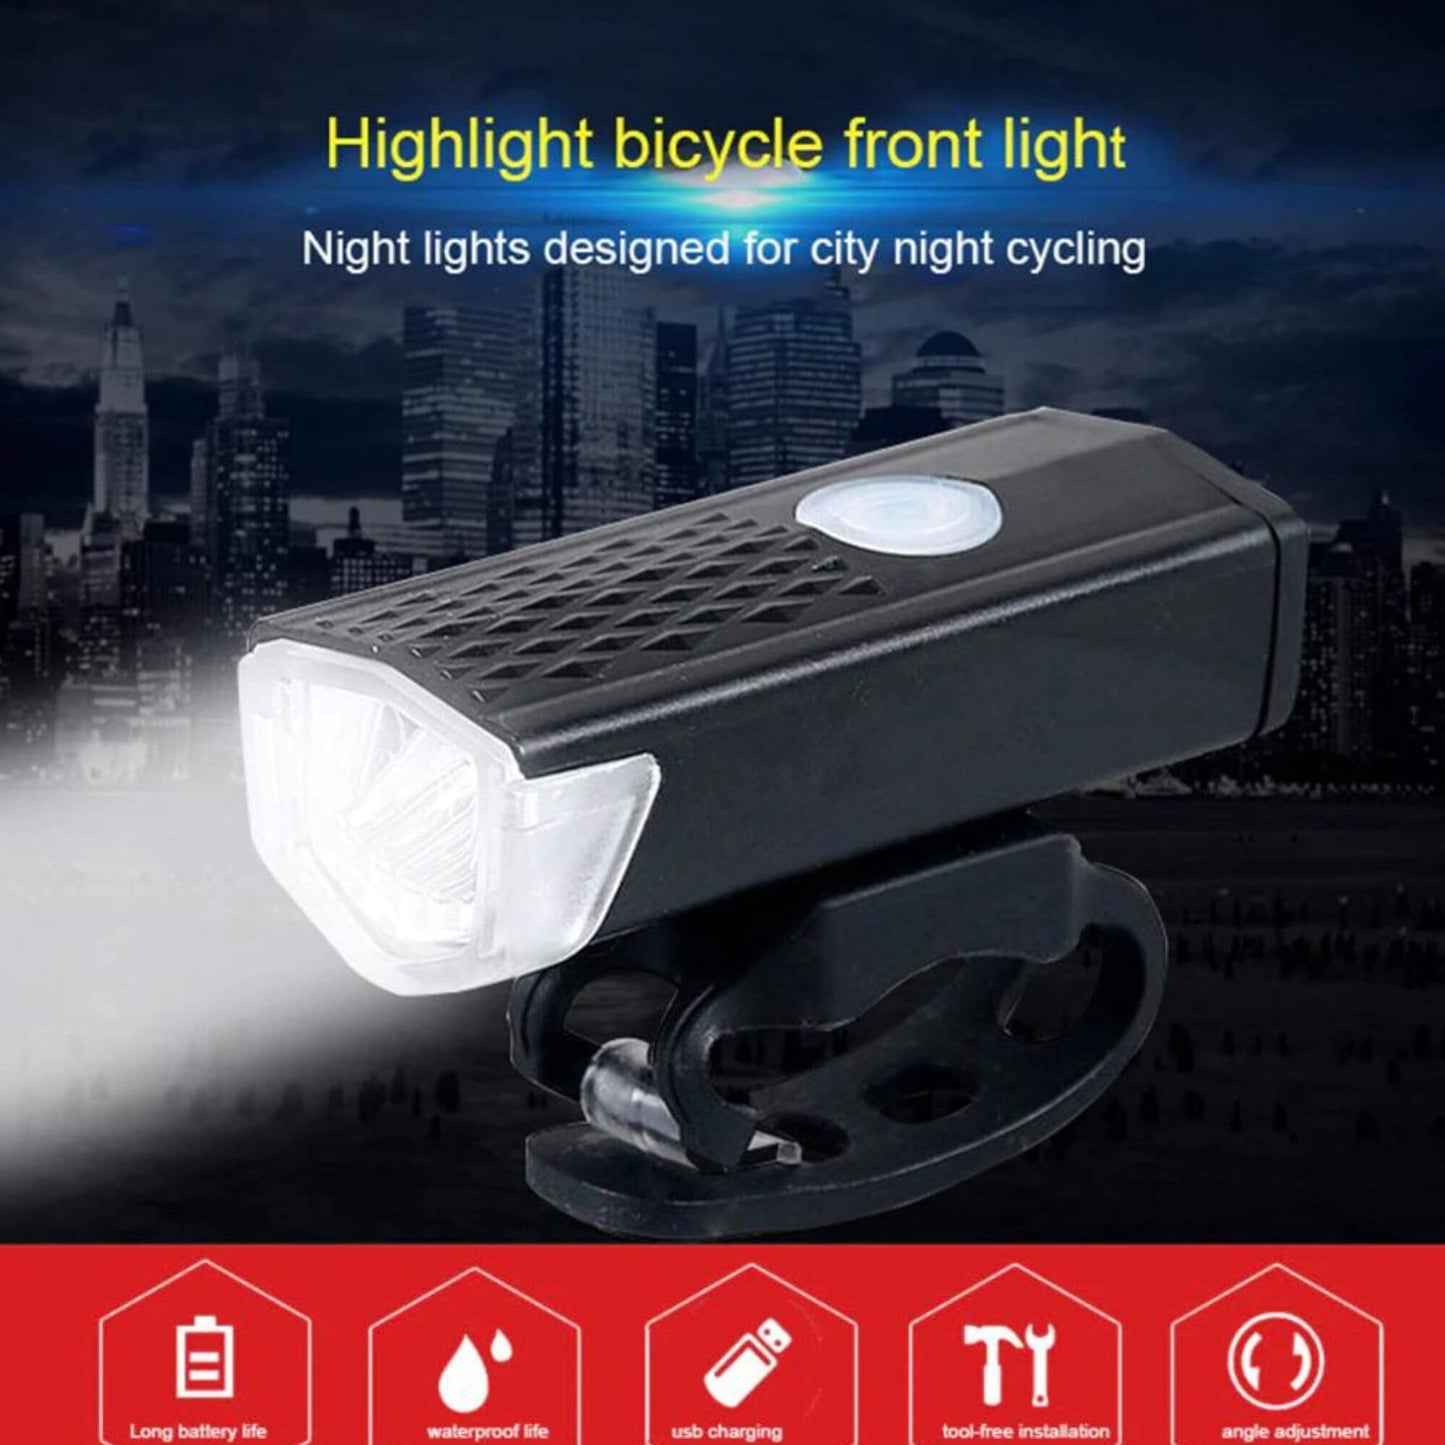 Front Bicycle light with bright light